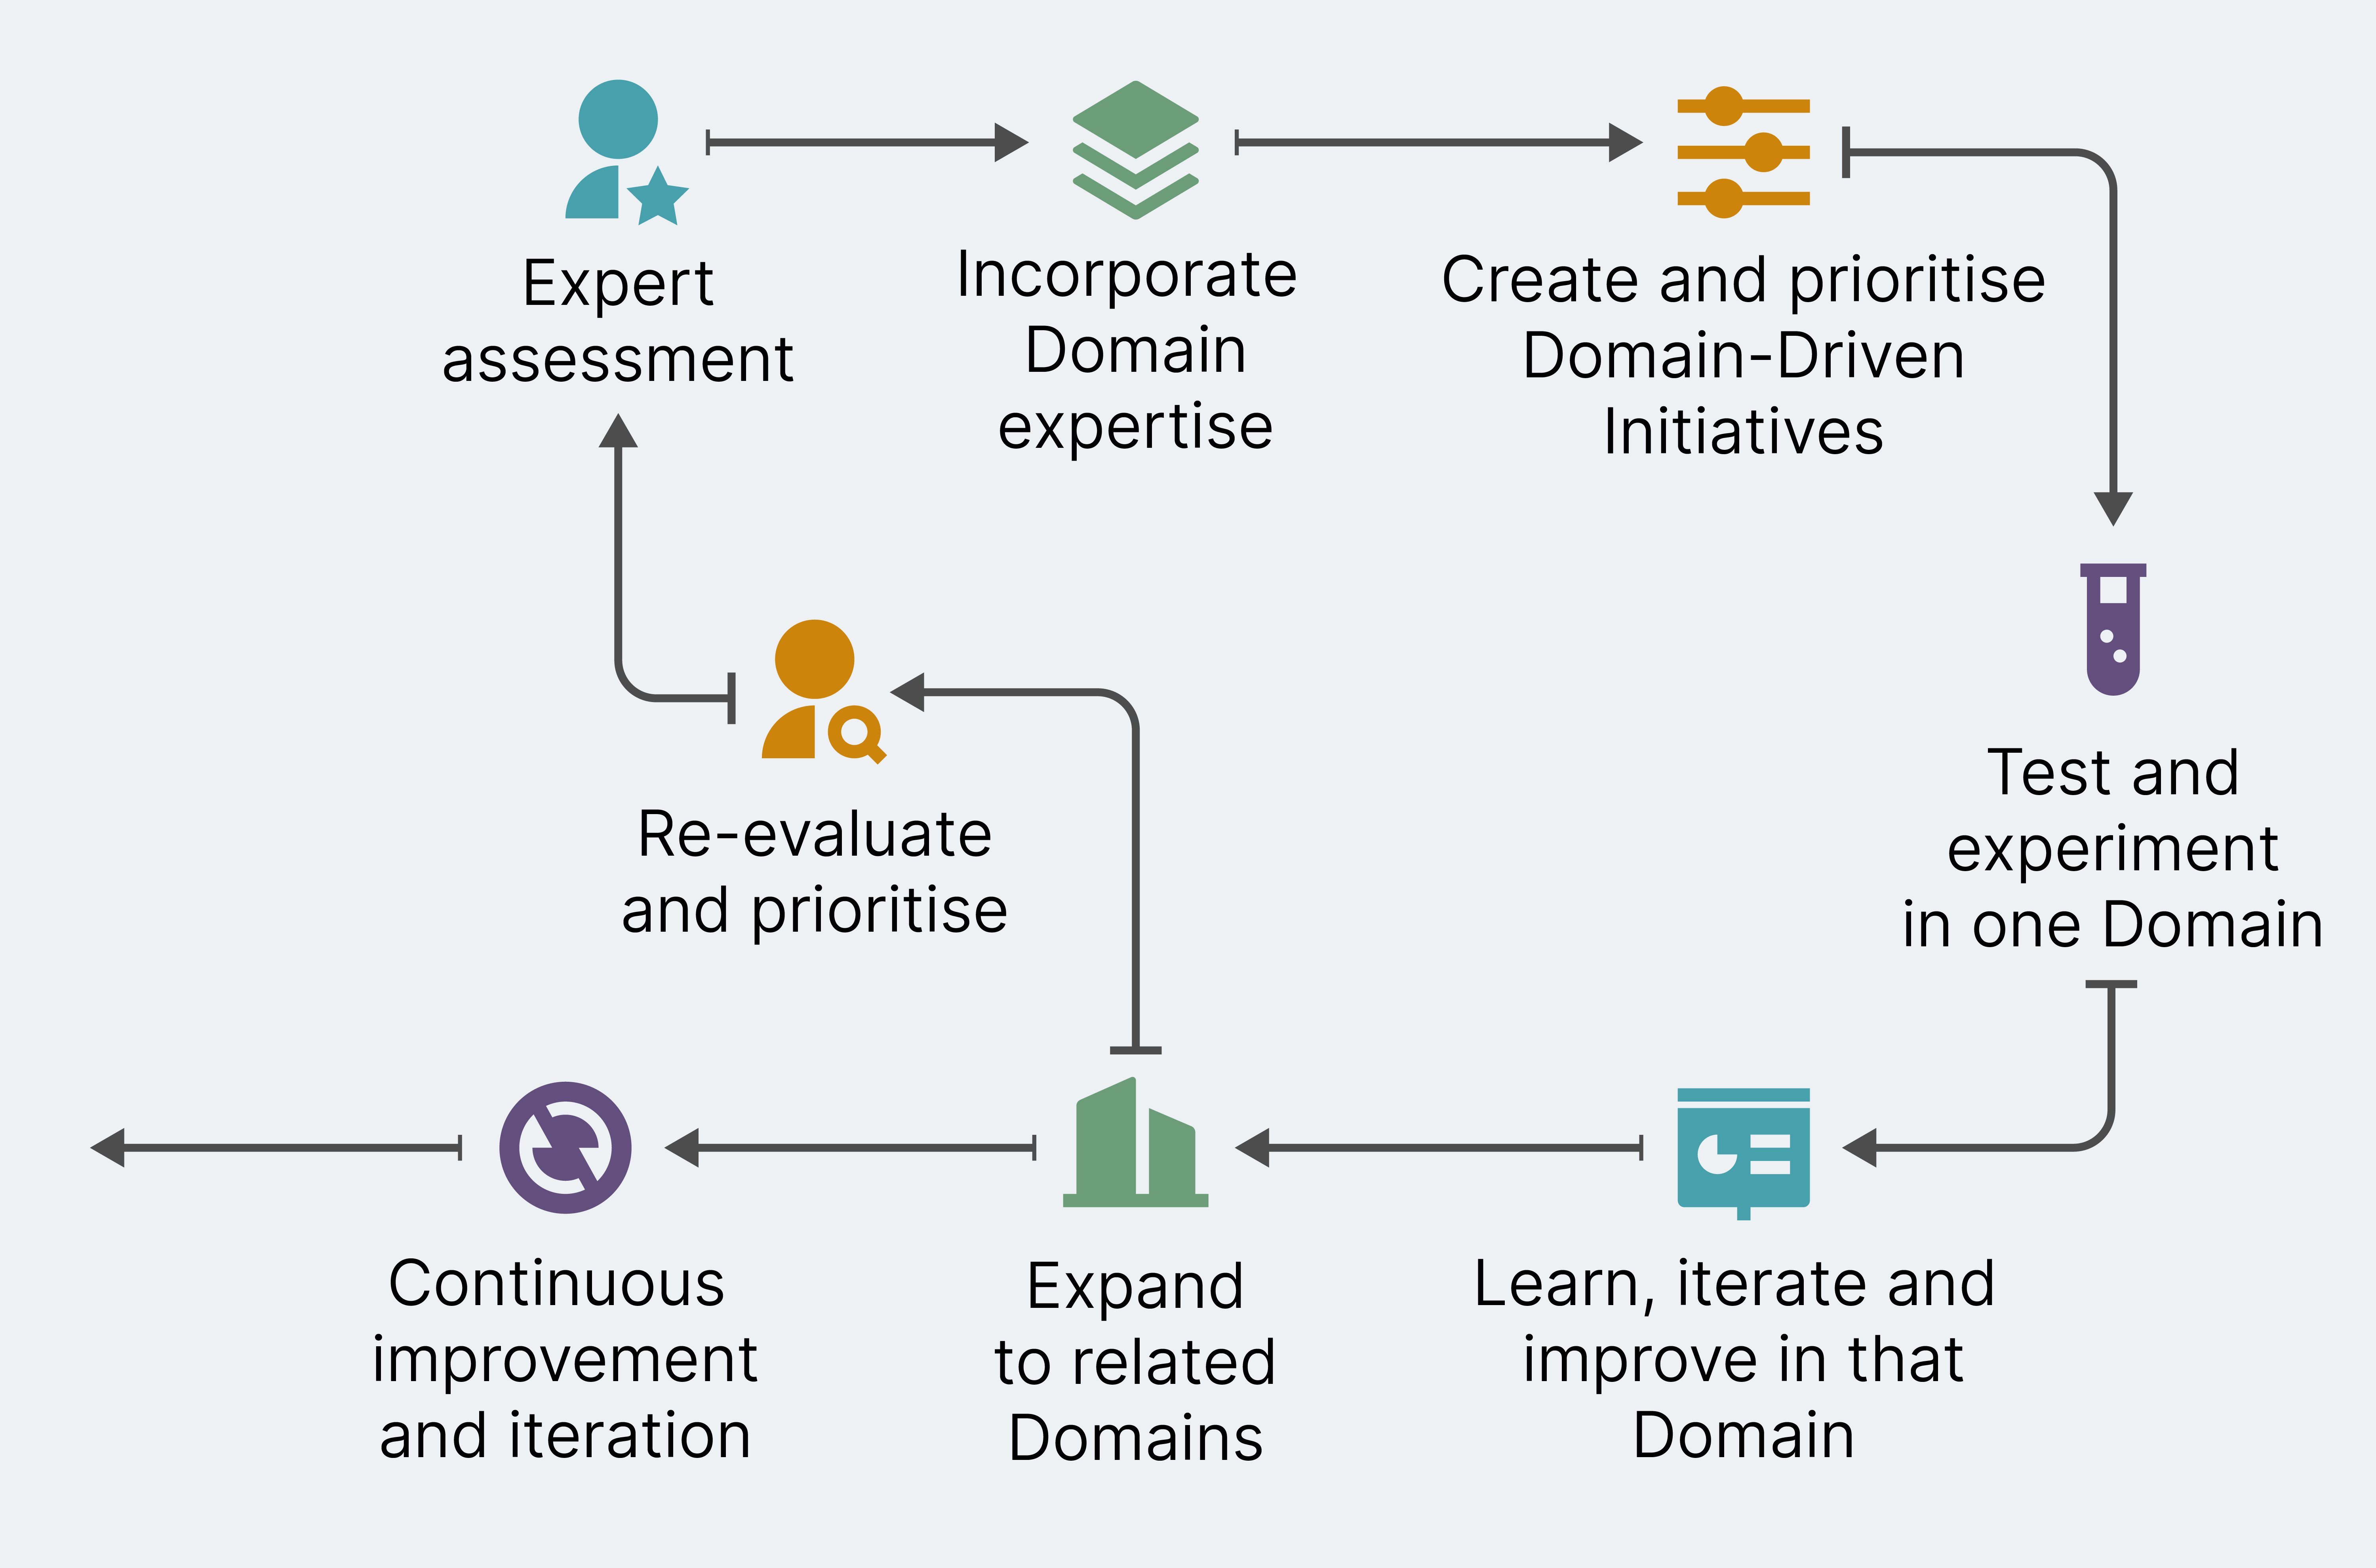 A cycle that starts in the top left with expert assessment, then moves to incorporate domain expertise, then create and prioritize domain-driven initiatives, then test & experiment in one domain, then learn, iterate, improve in that domain, then expand to related domains and then there is one arrow out of the cycle that moves on to continuous improvement and iteration and another that goes back to the expert assessment that says re-evaluate and prioritize.